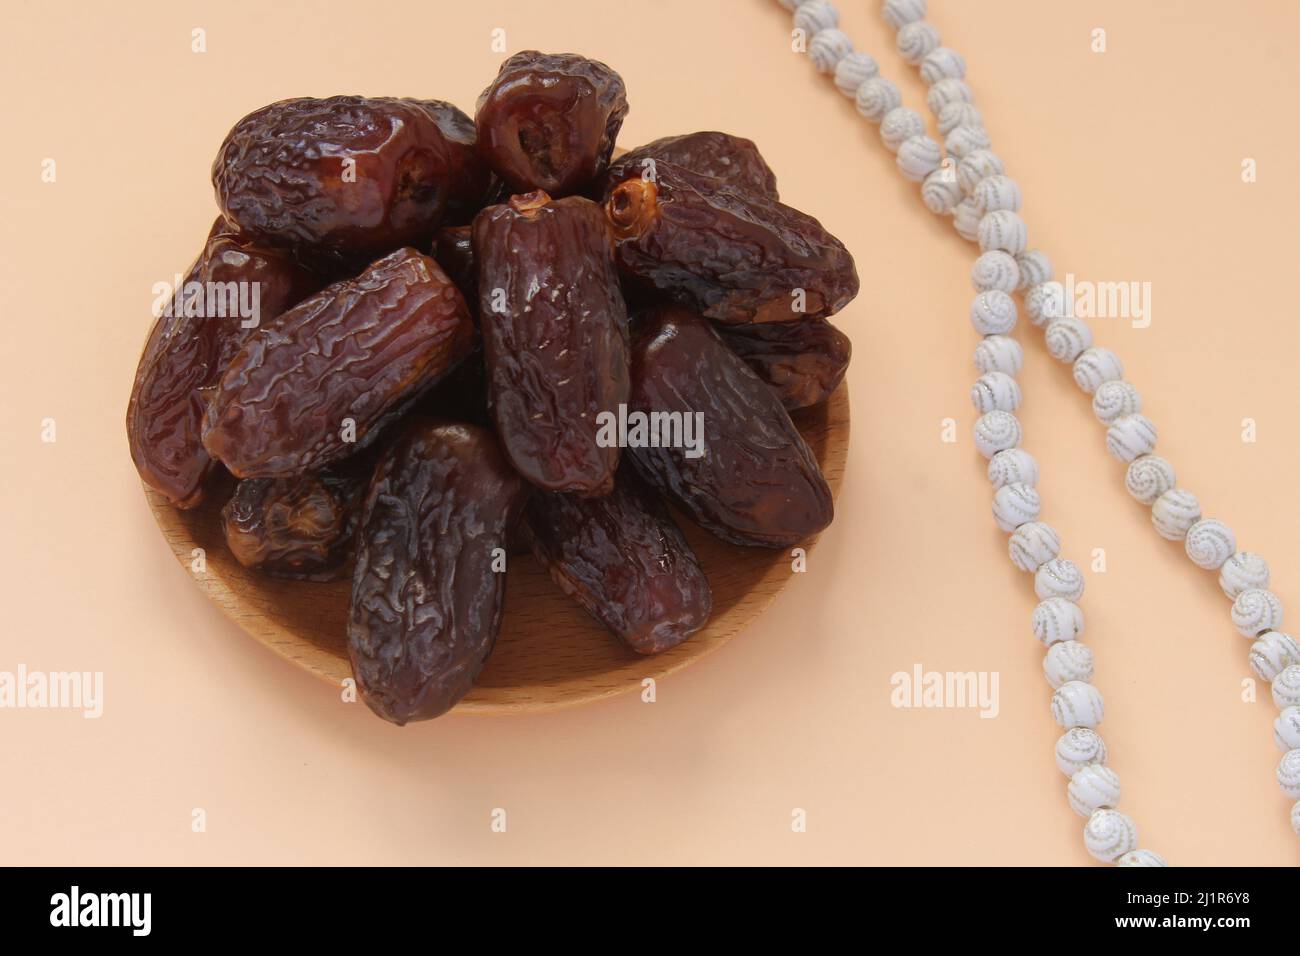 Fresh date fruits and white prayer beads, ramadhan concept idea. Sitting view. Vibrant color date fruit prepared for iftar. Stock Photo